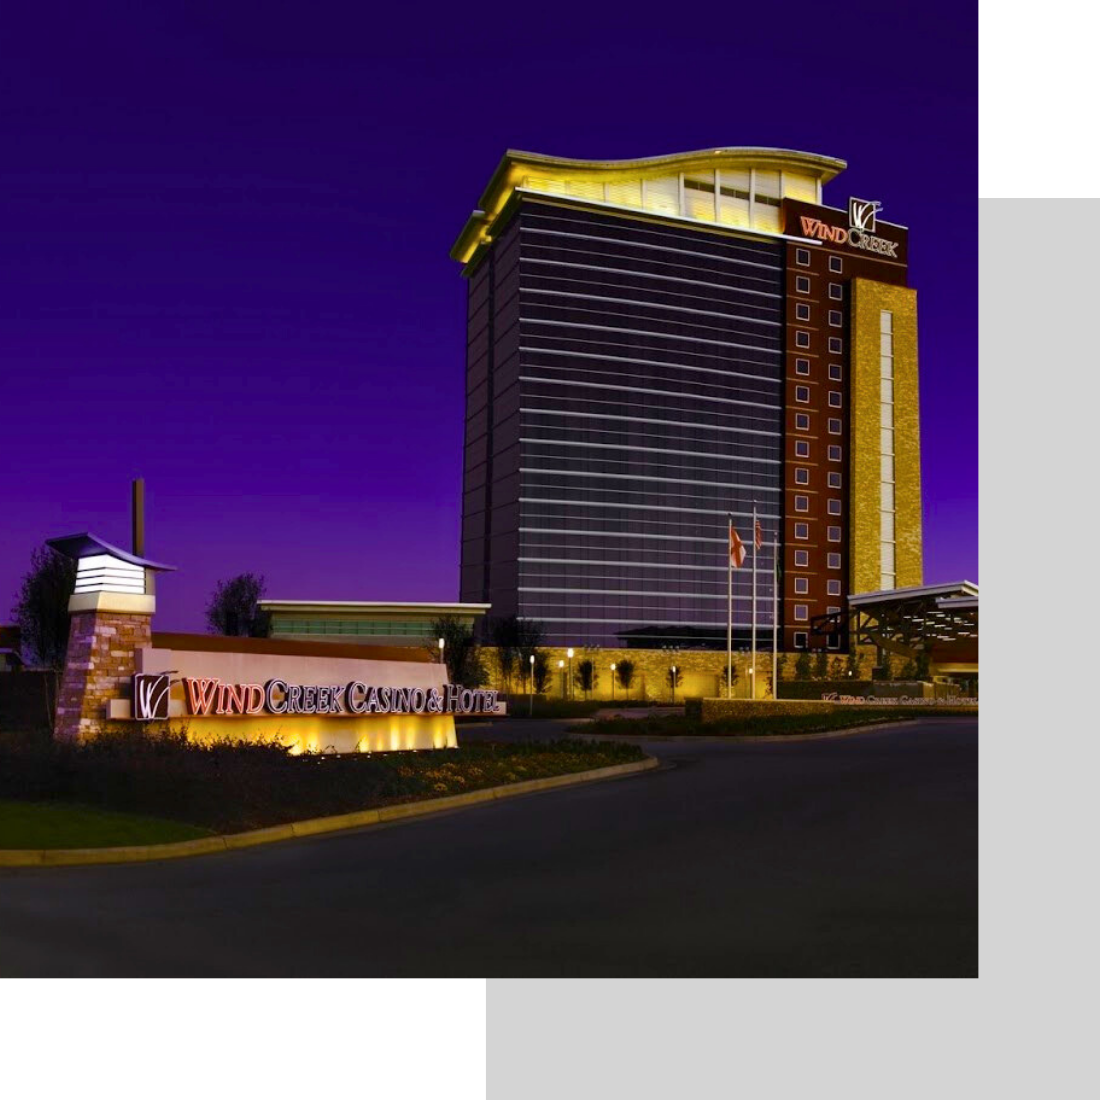 wind creek casino at dusk lit up with sign outside